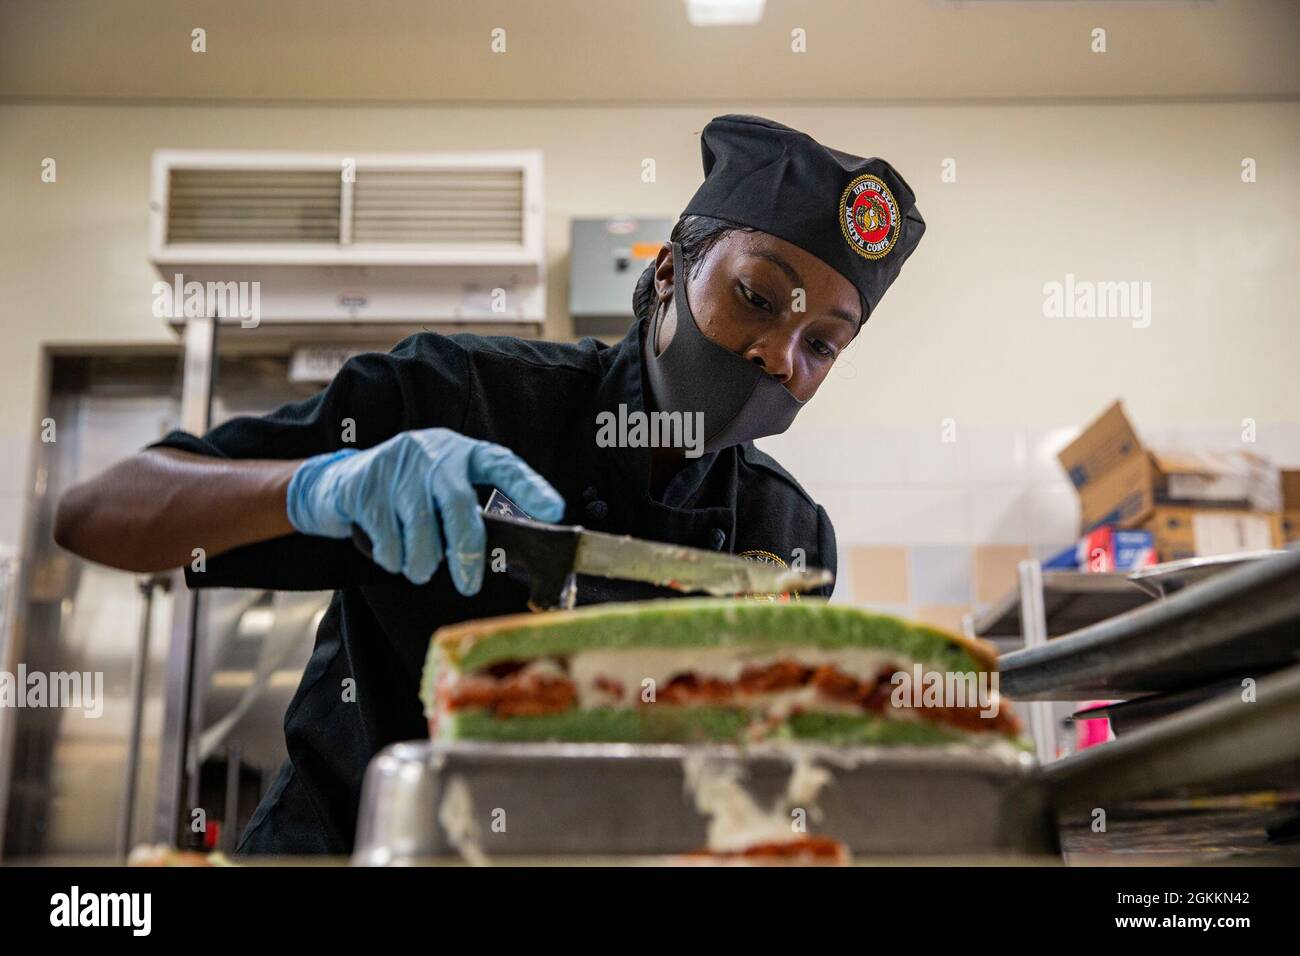 U S Marine Corps Cpl Jaden Brown A Food Service Specialist With 3rd Battalion 12th Marines 3d Marine Division Prepares Food During A Joint Culinary Competition On Camp Foster Okinawa Japan May 19